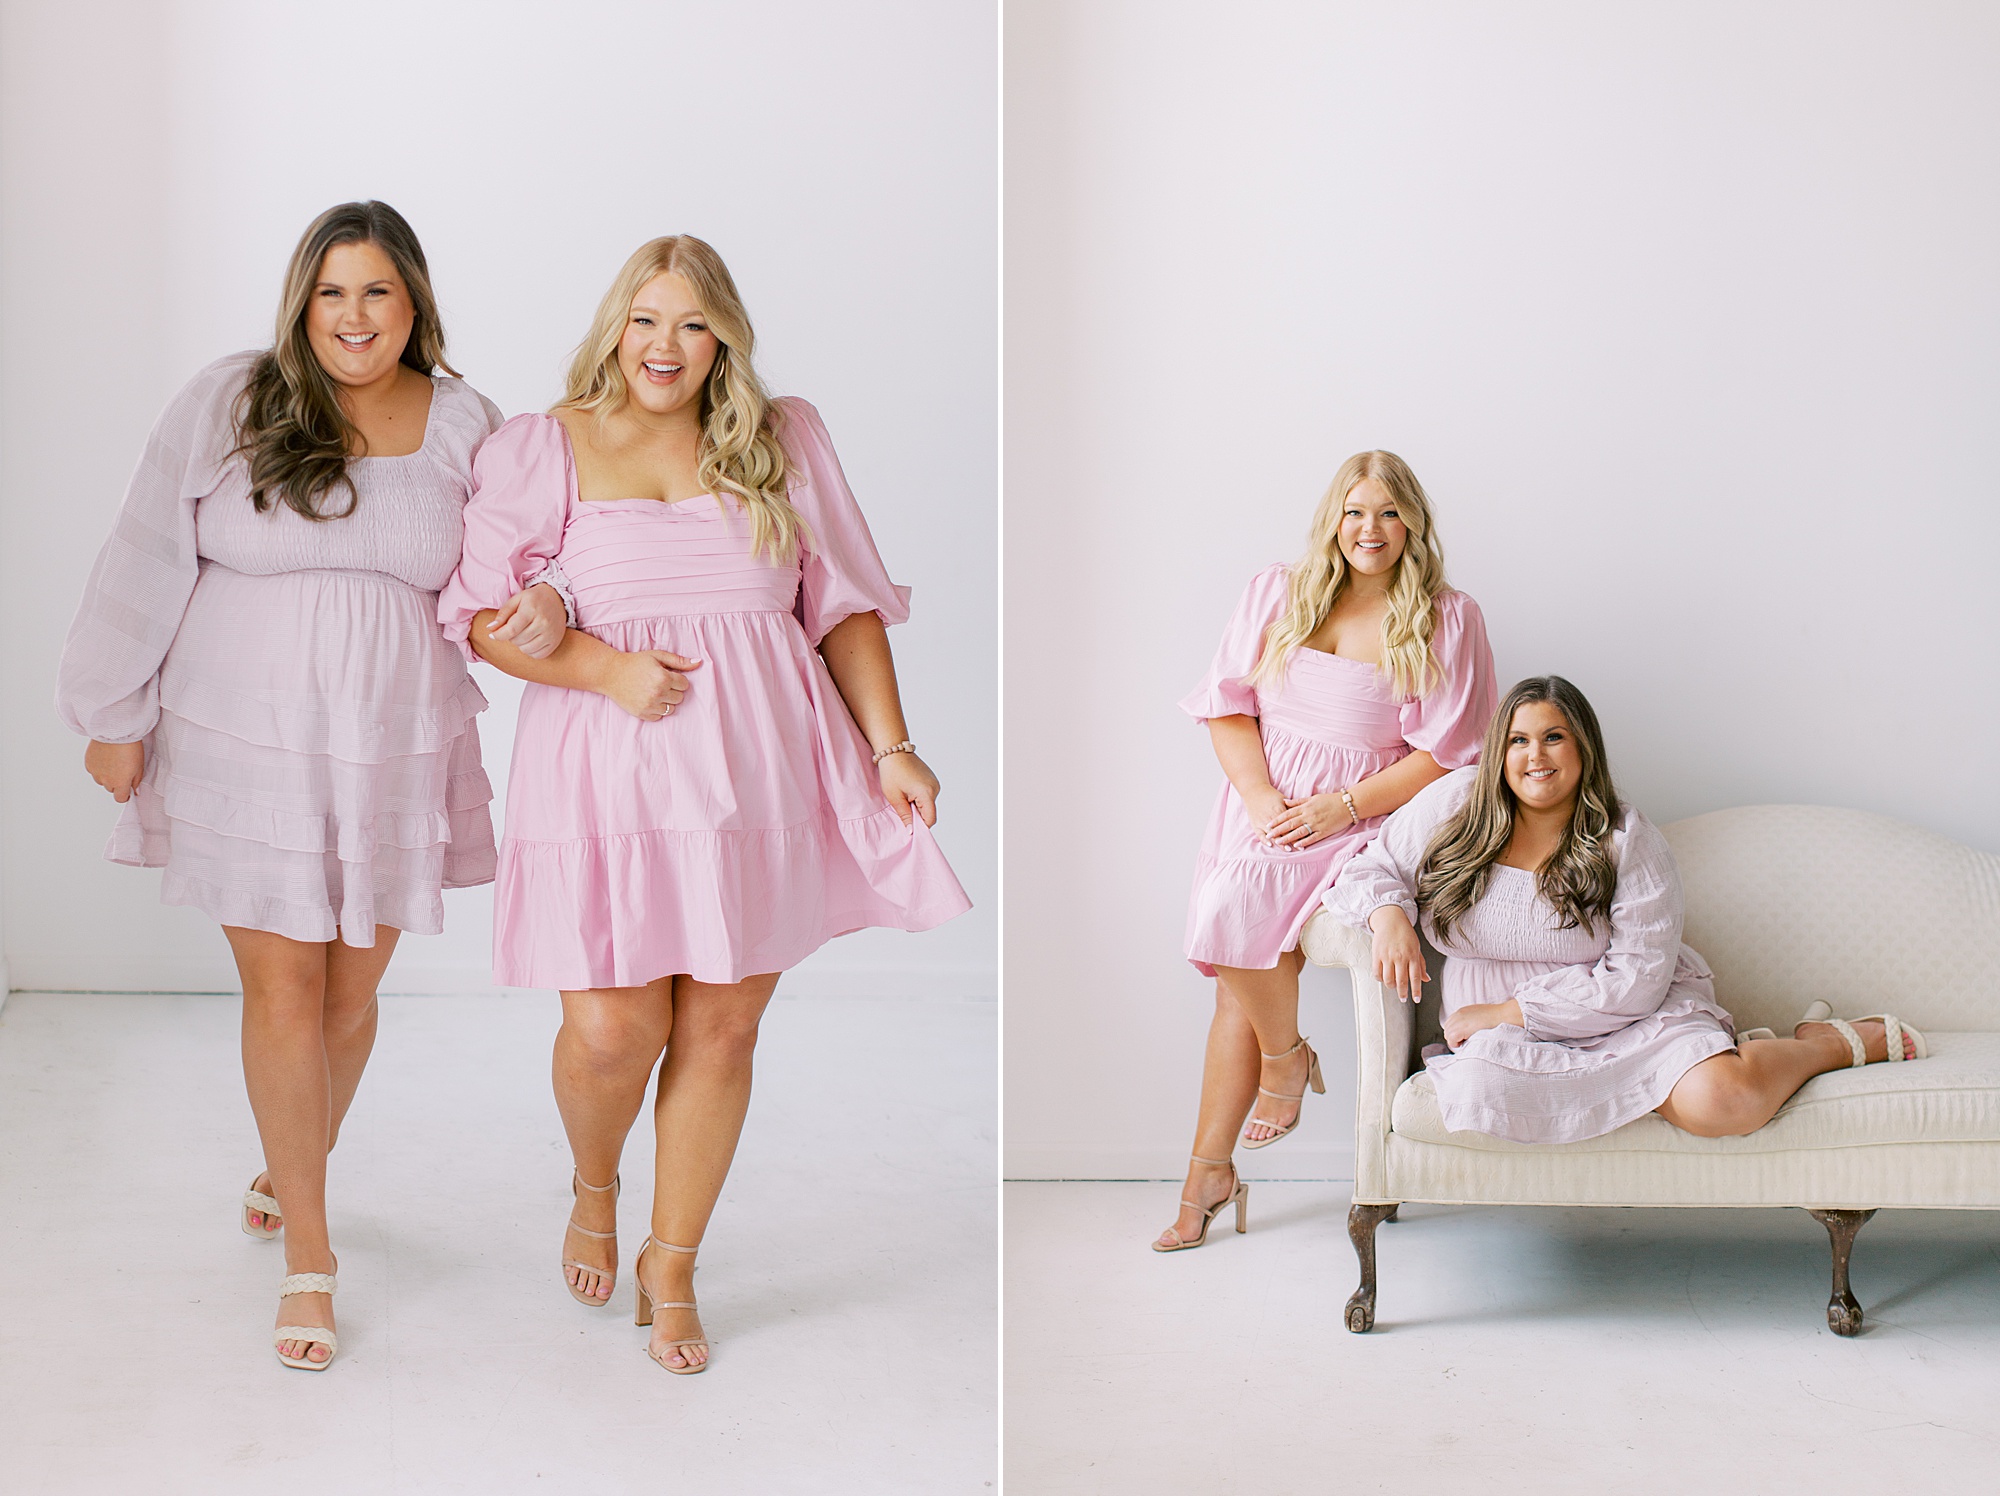 women hug together on couch during studio branding portraits